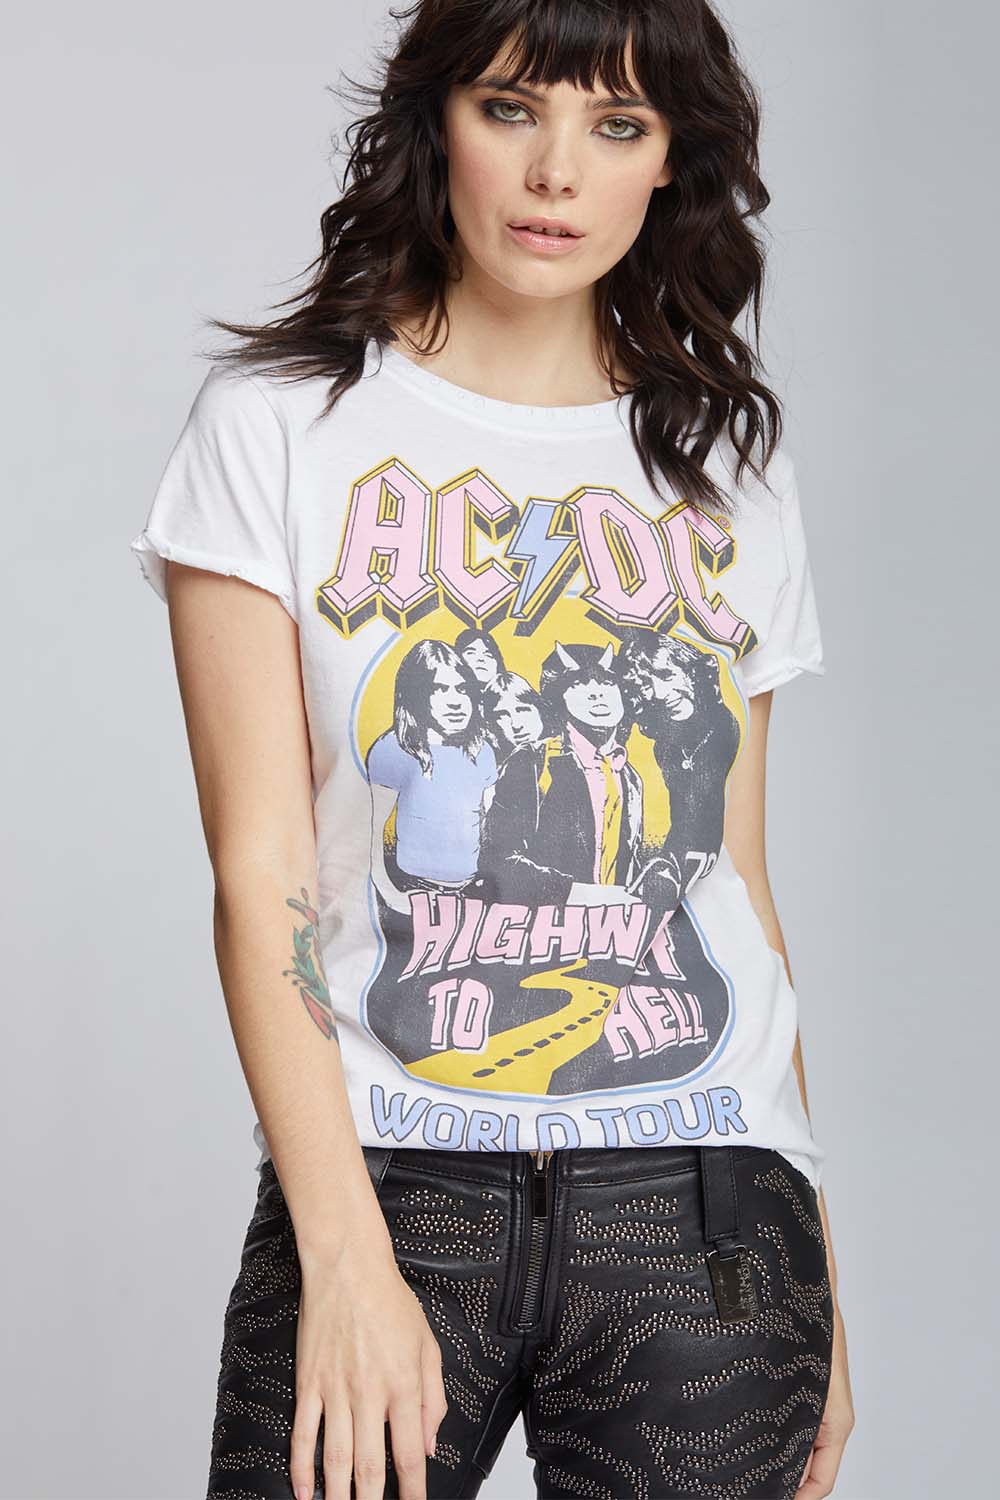 ACDC Highway To Hell World Tour '79 Tee